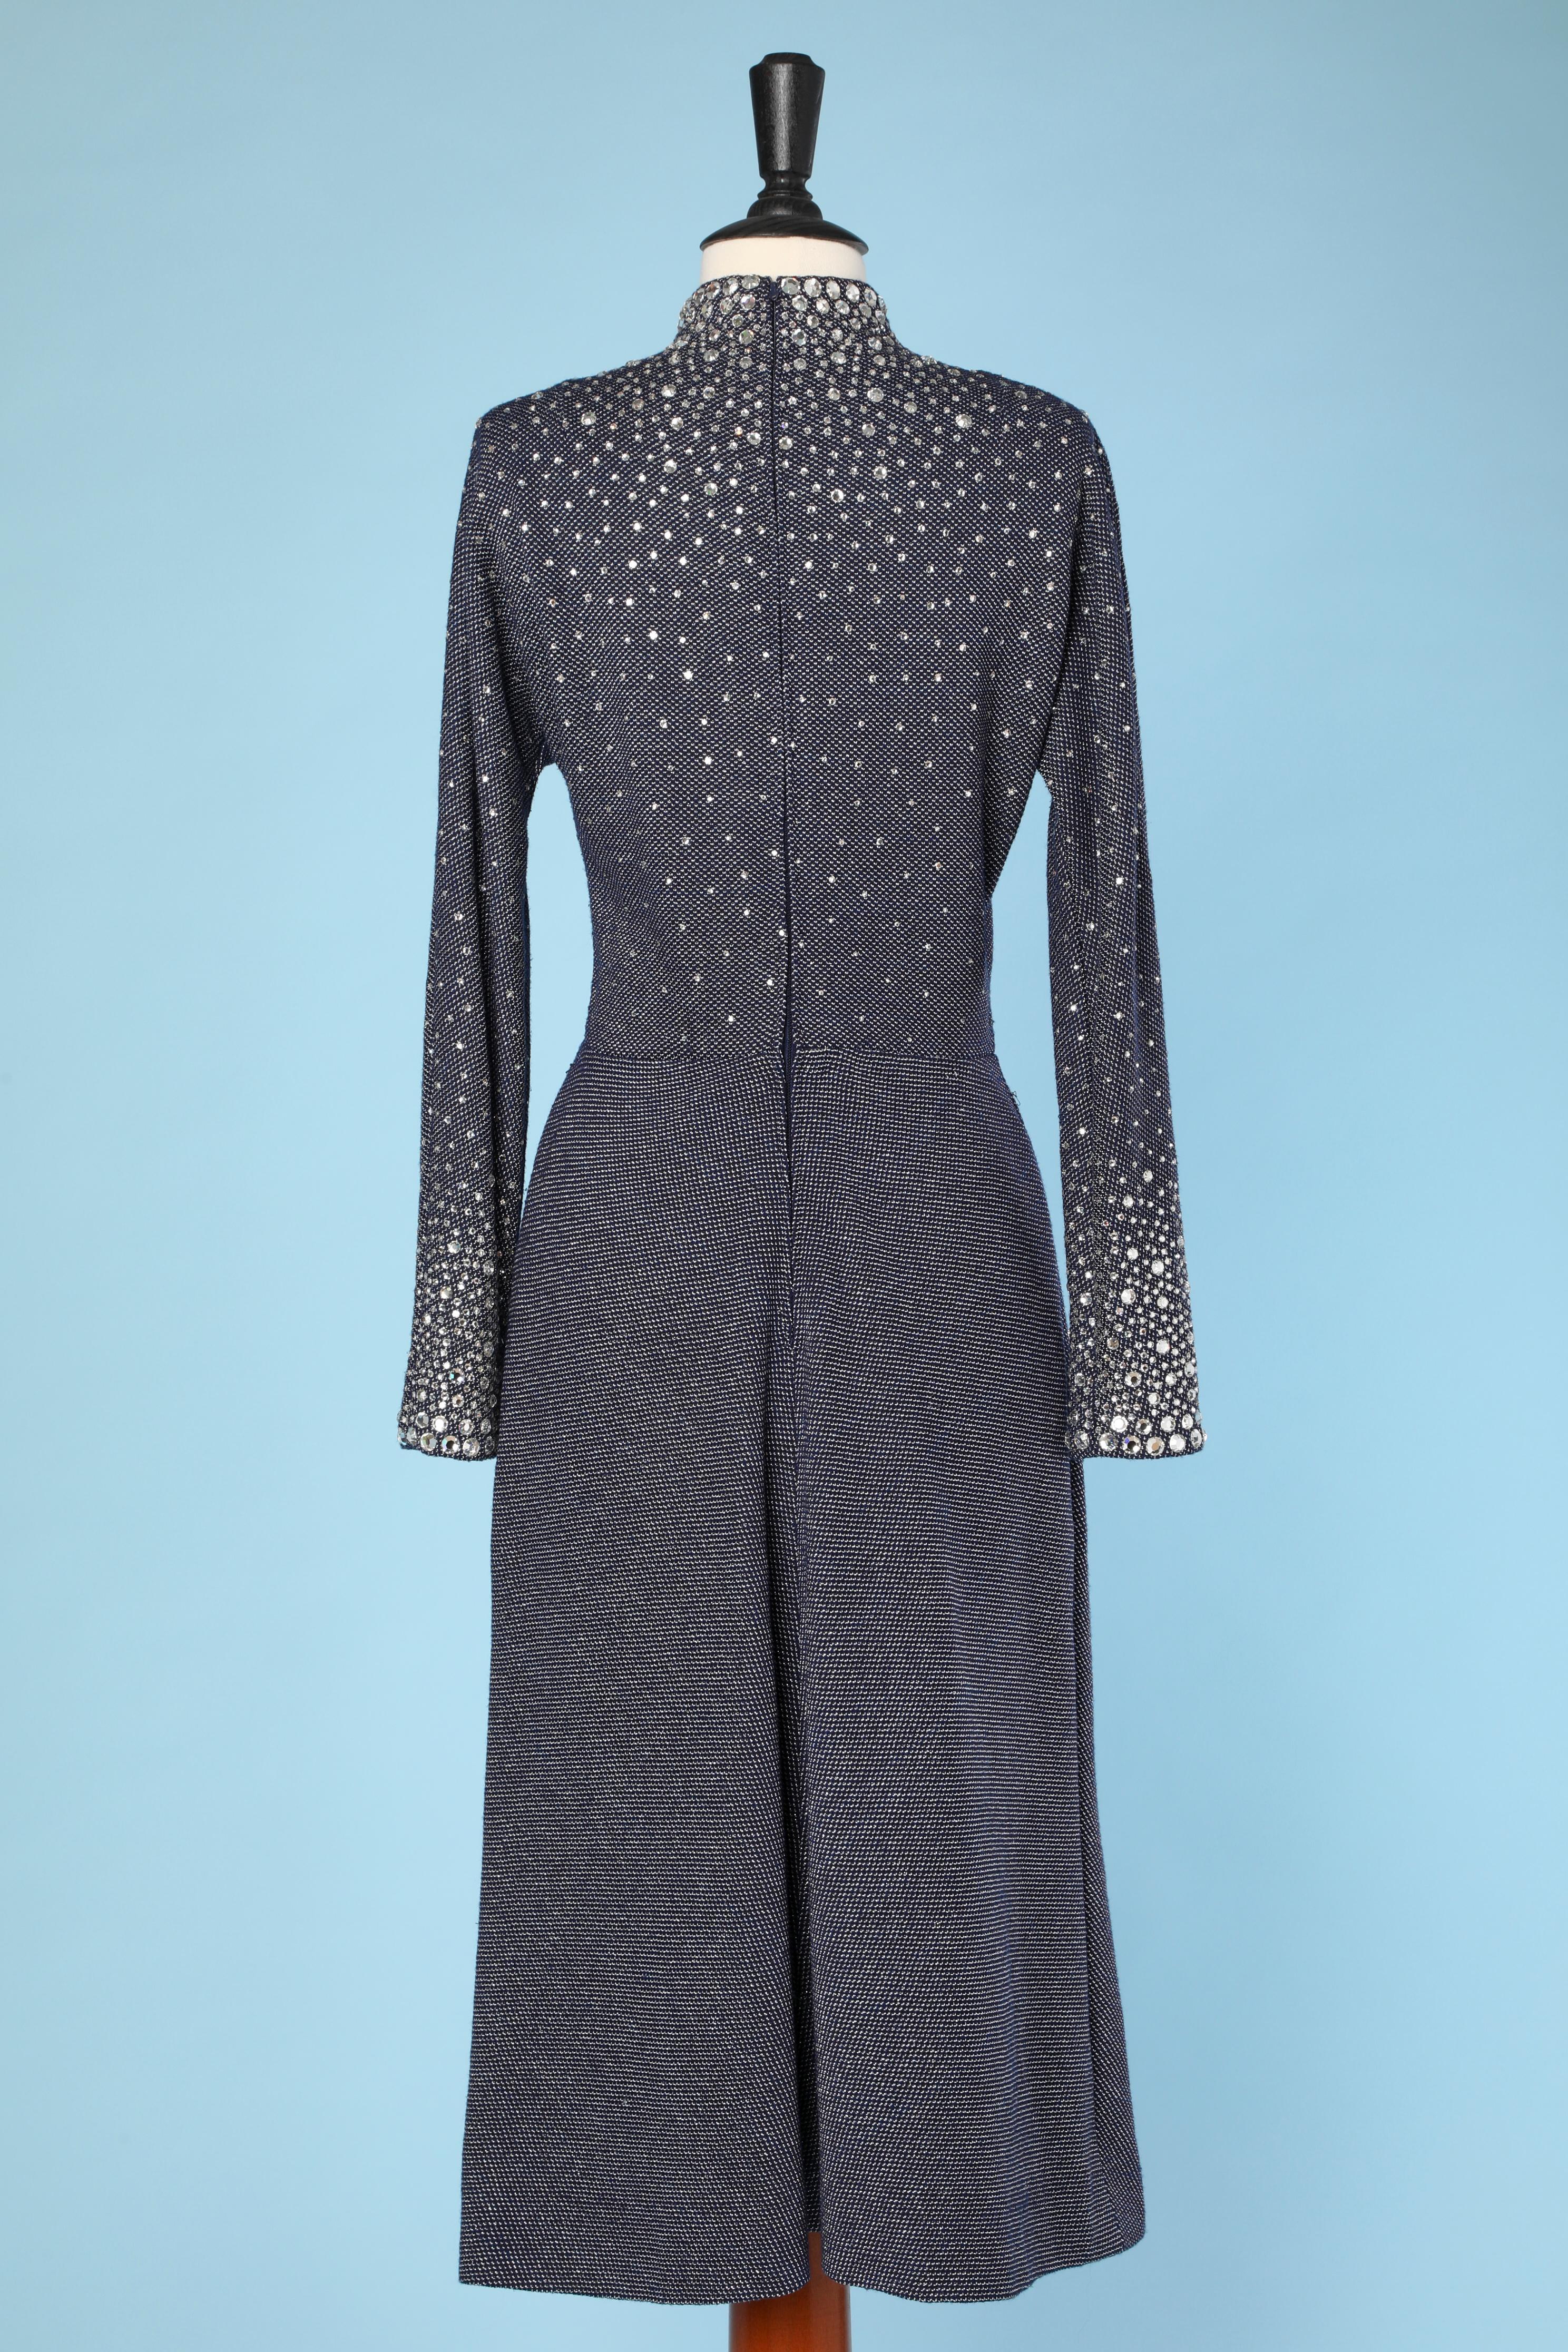 Lurex jersey cocktail dress with rhinestone. Zip in the middle back. No lining. Raglan sleeve. 

SIZE S / M 
Pauline Trigère (November 4, 1908 – February 13, 2002) was a Franco-American couturière. Her award-winning styles reached their height of